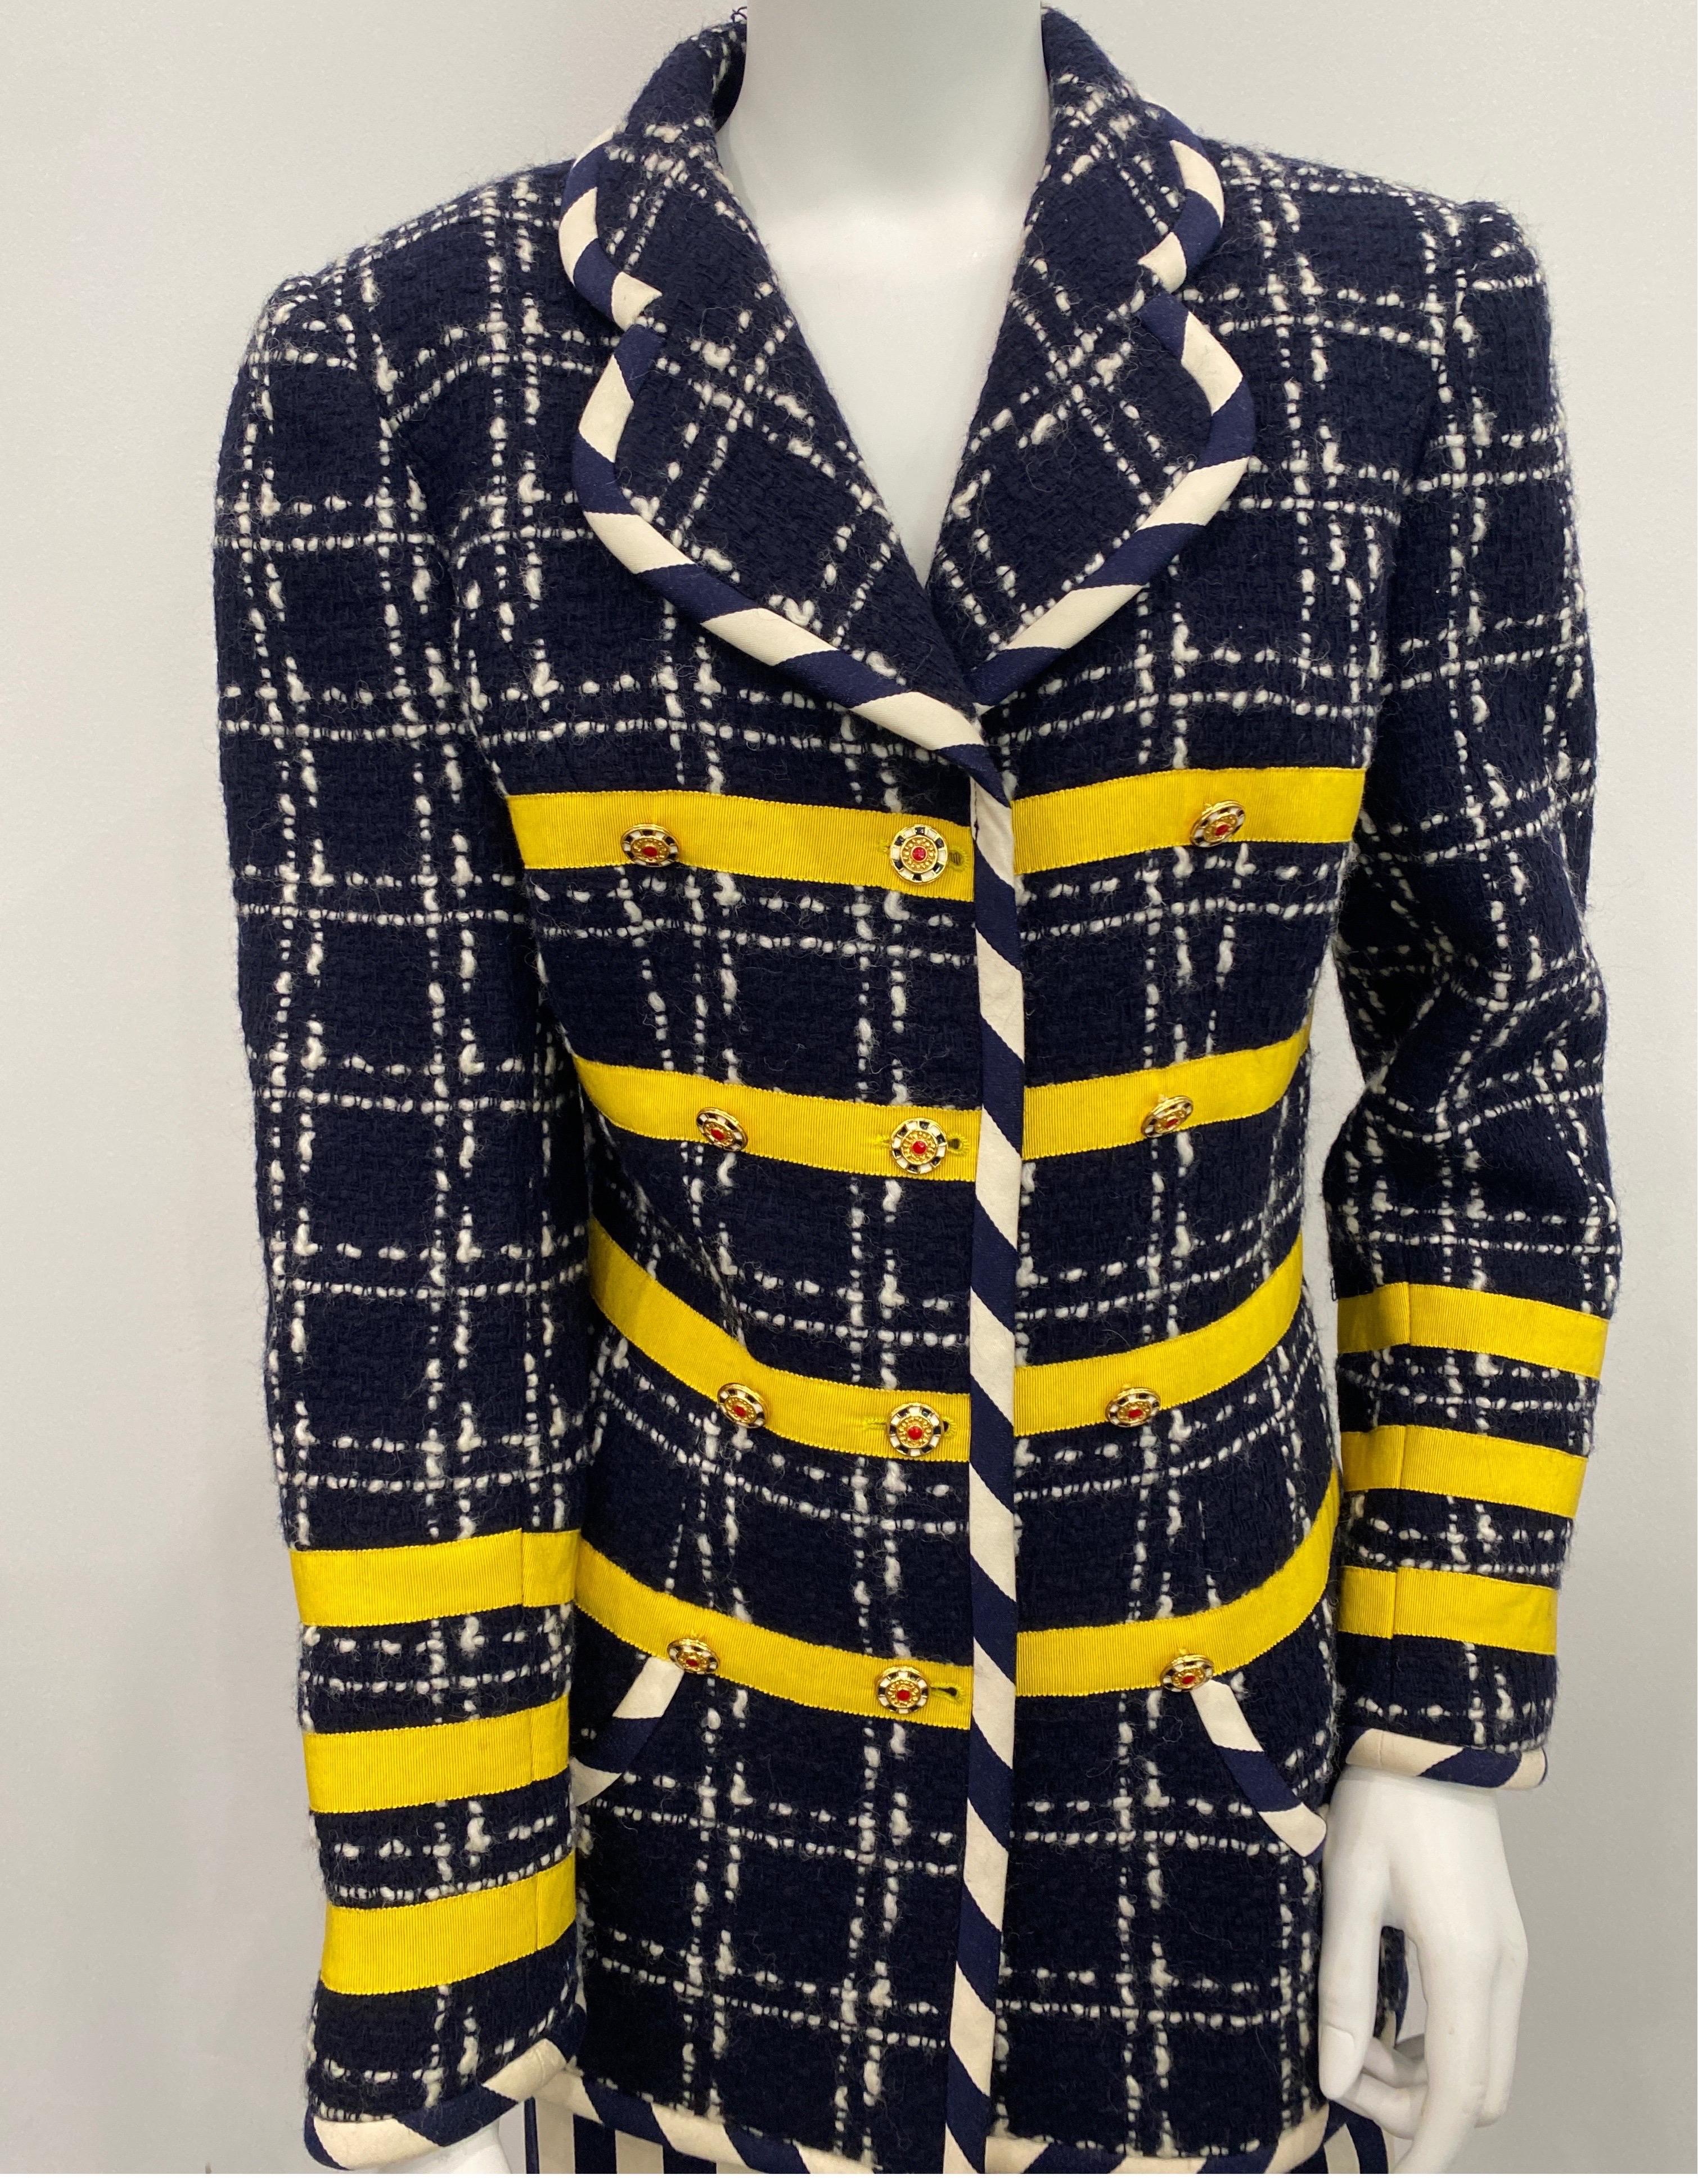 Emanuel Ungaro Parallele 1990’s Navy Boucle Jacket with skirt - Size 12 In Excellent Condition For Sale In West Palm Beach, FL